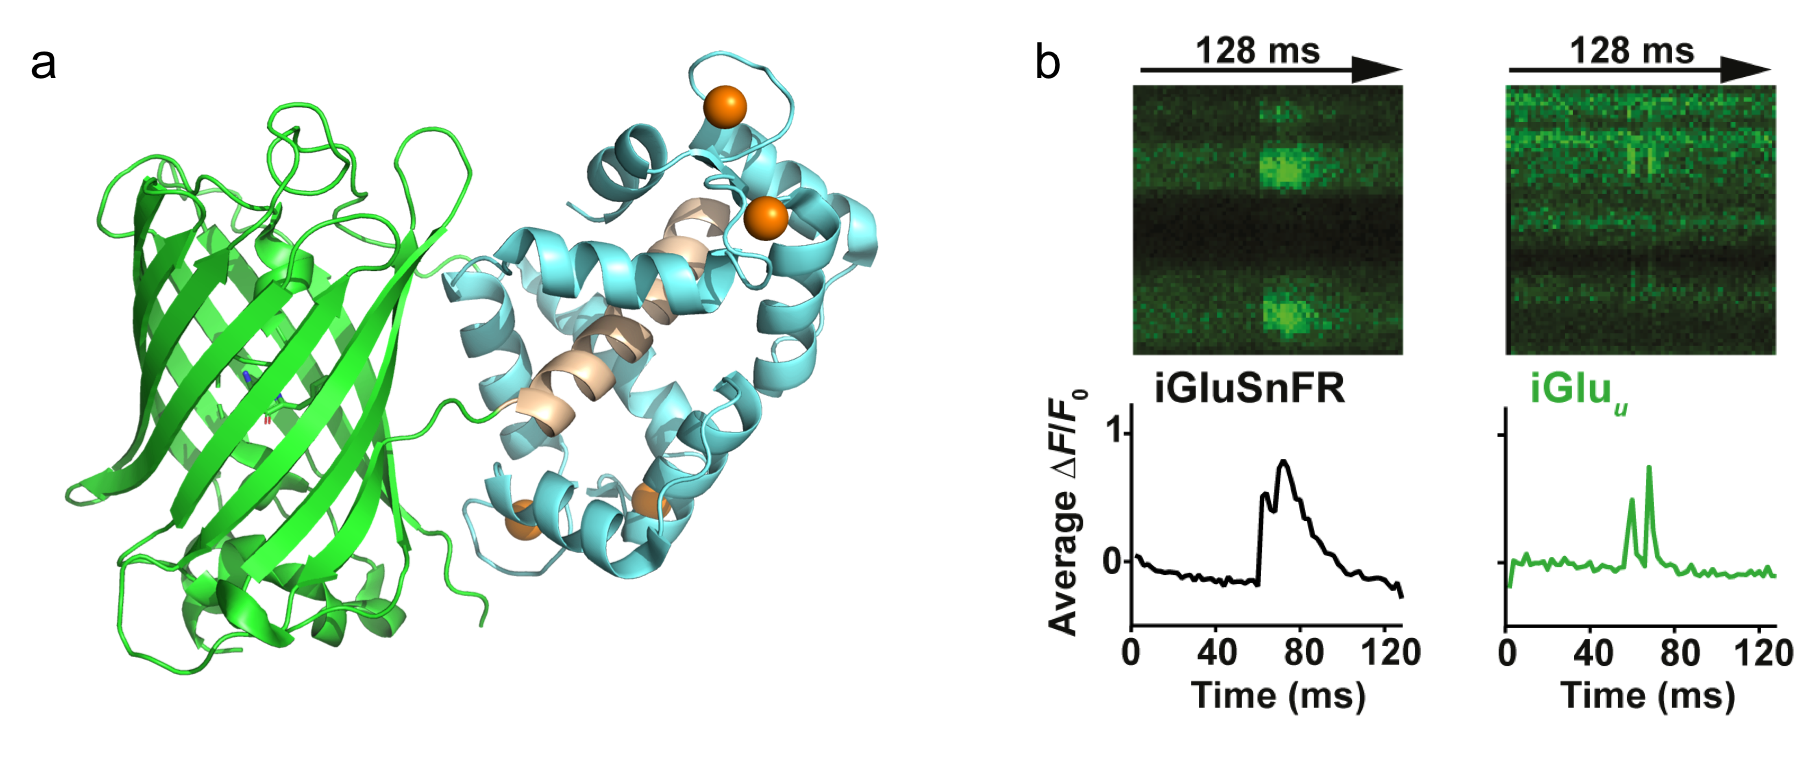 (a) Cartoon representation of the crystal structure of GCaMP6m calcium indicator (PDB 3WLD). (b) Imaging glutamate release from single presynaptic terminals using iGluSnFR and our newly developed iGluu after stimulation by two somatic APs at 10-ms interstimulus intervals. (Helassa et al., PNAS, 2018)